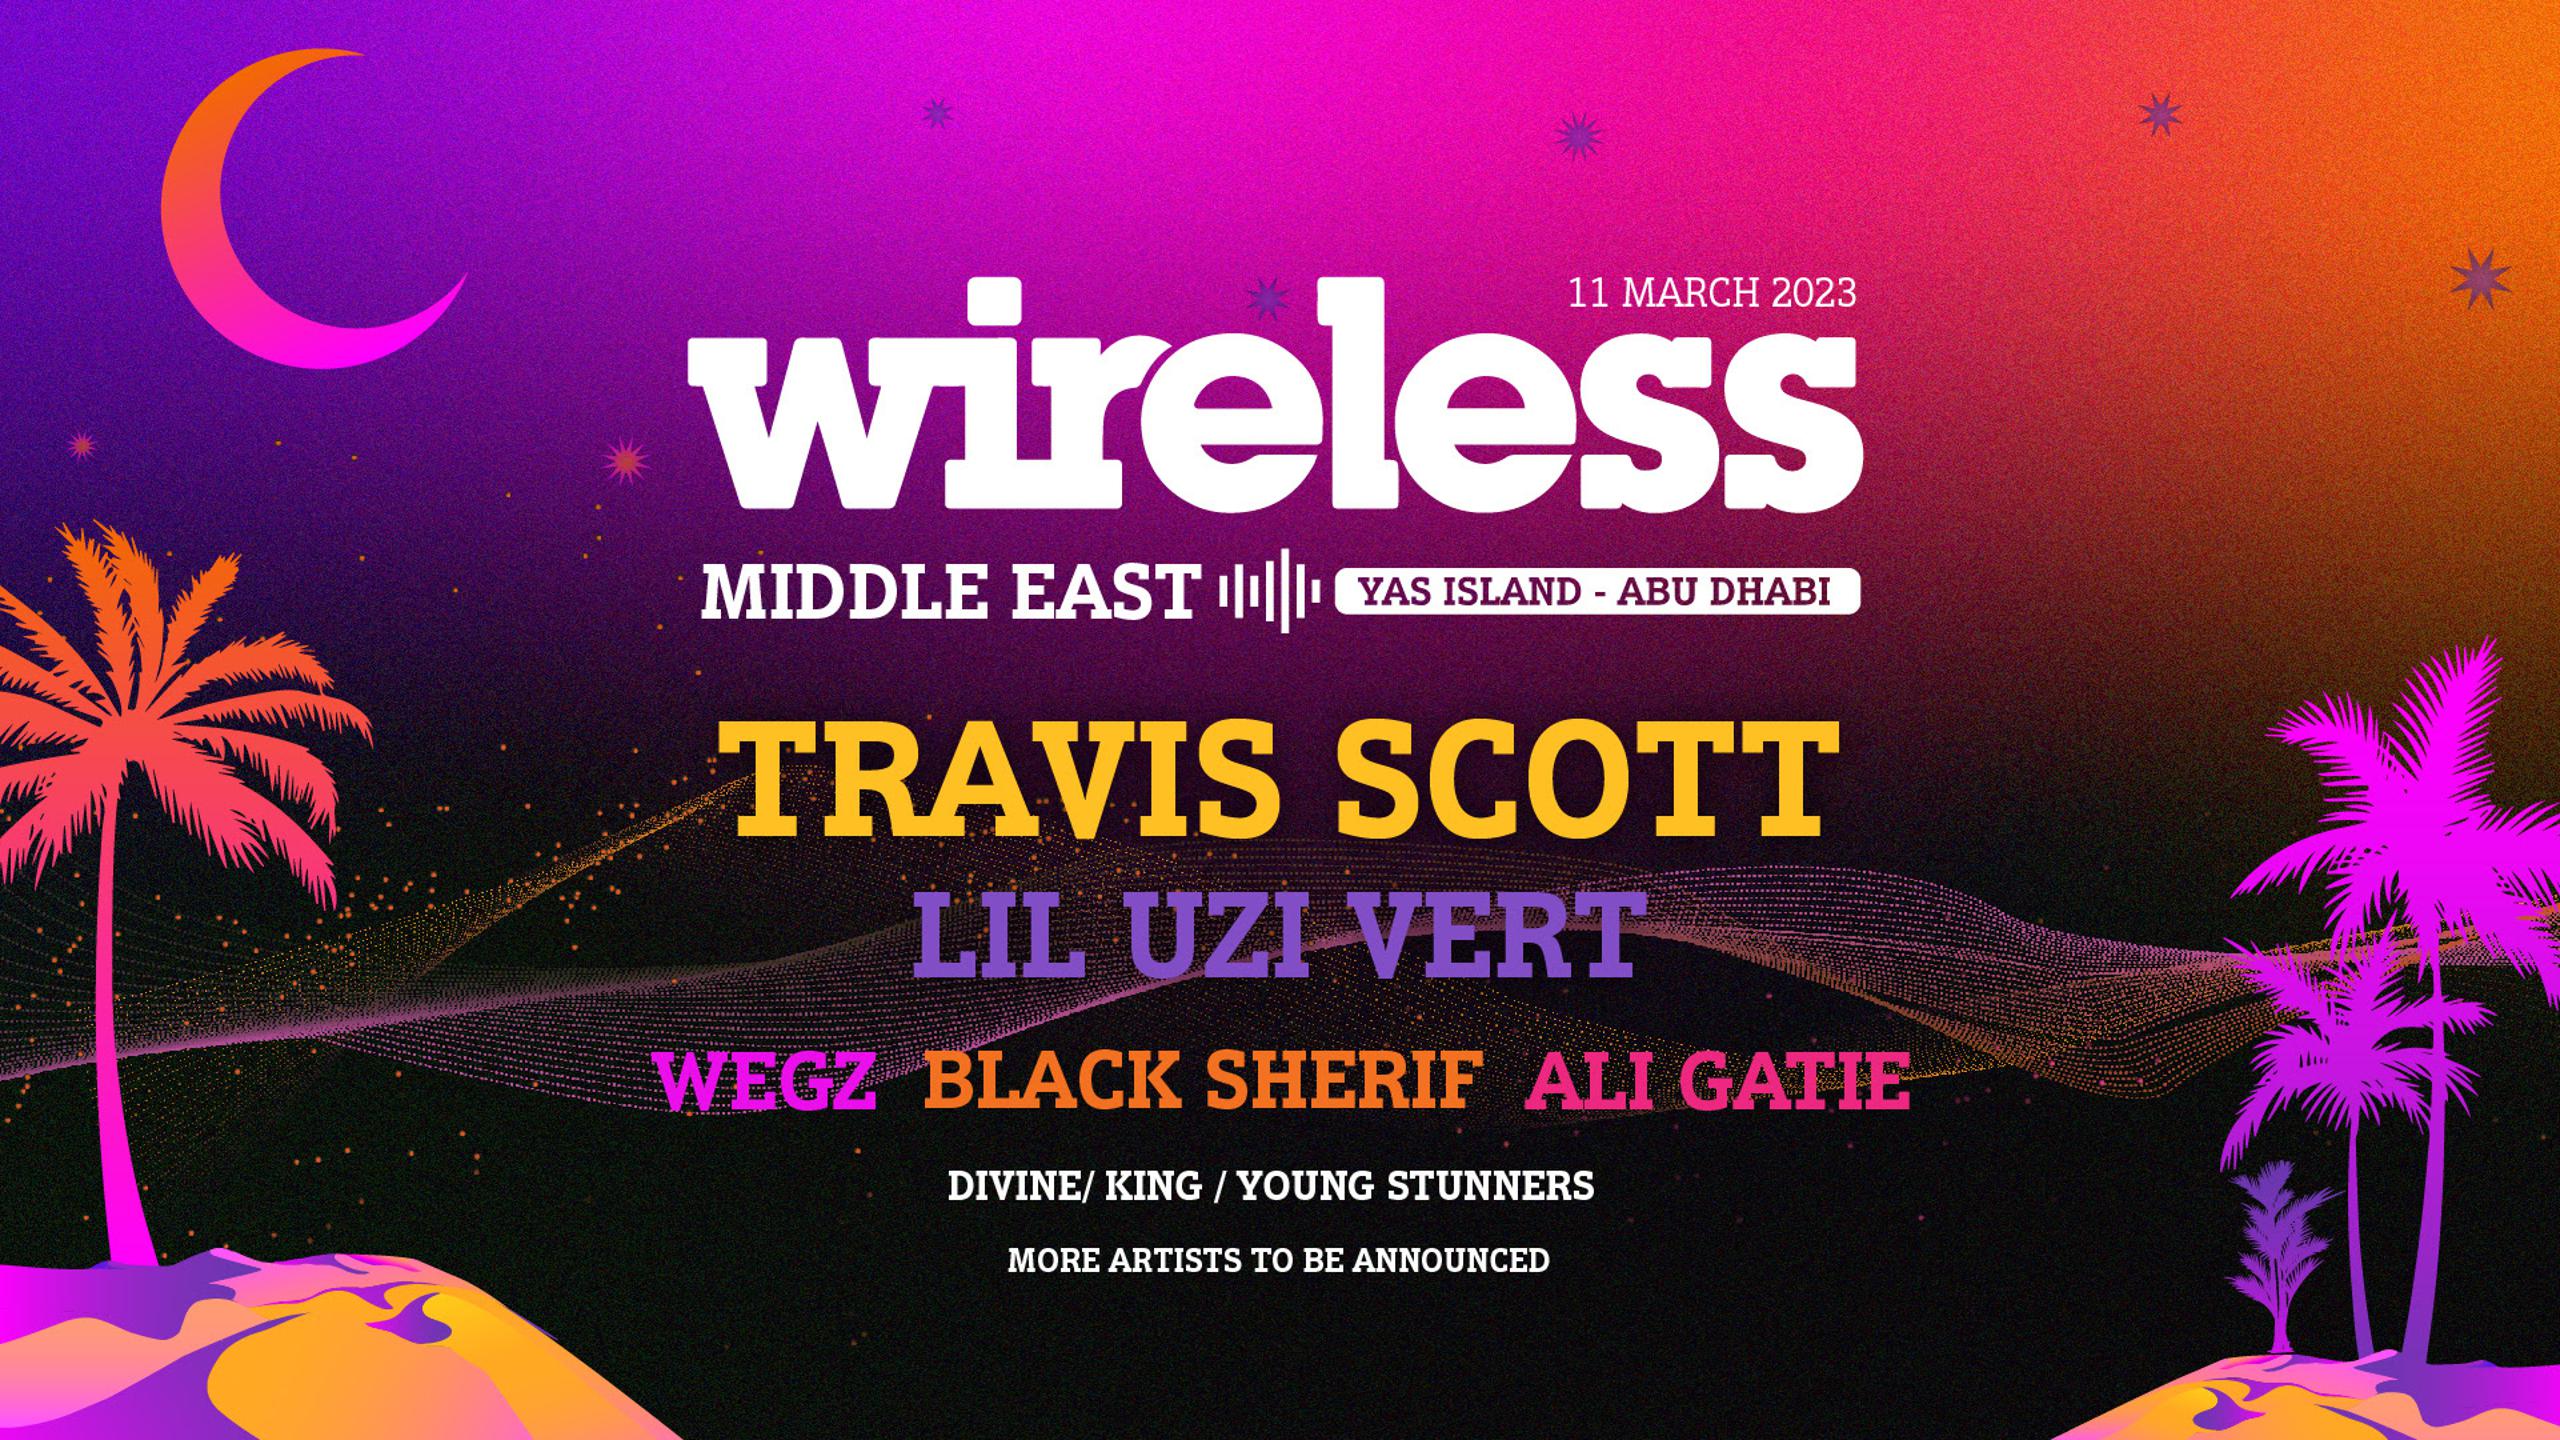 Wireless Festival Middle East 2023. Tickets, lineup, bands for Wireless